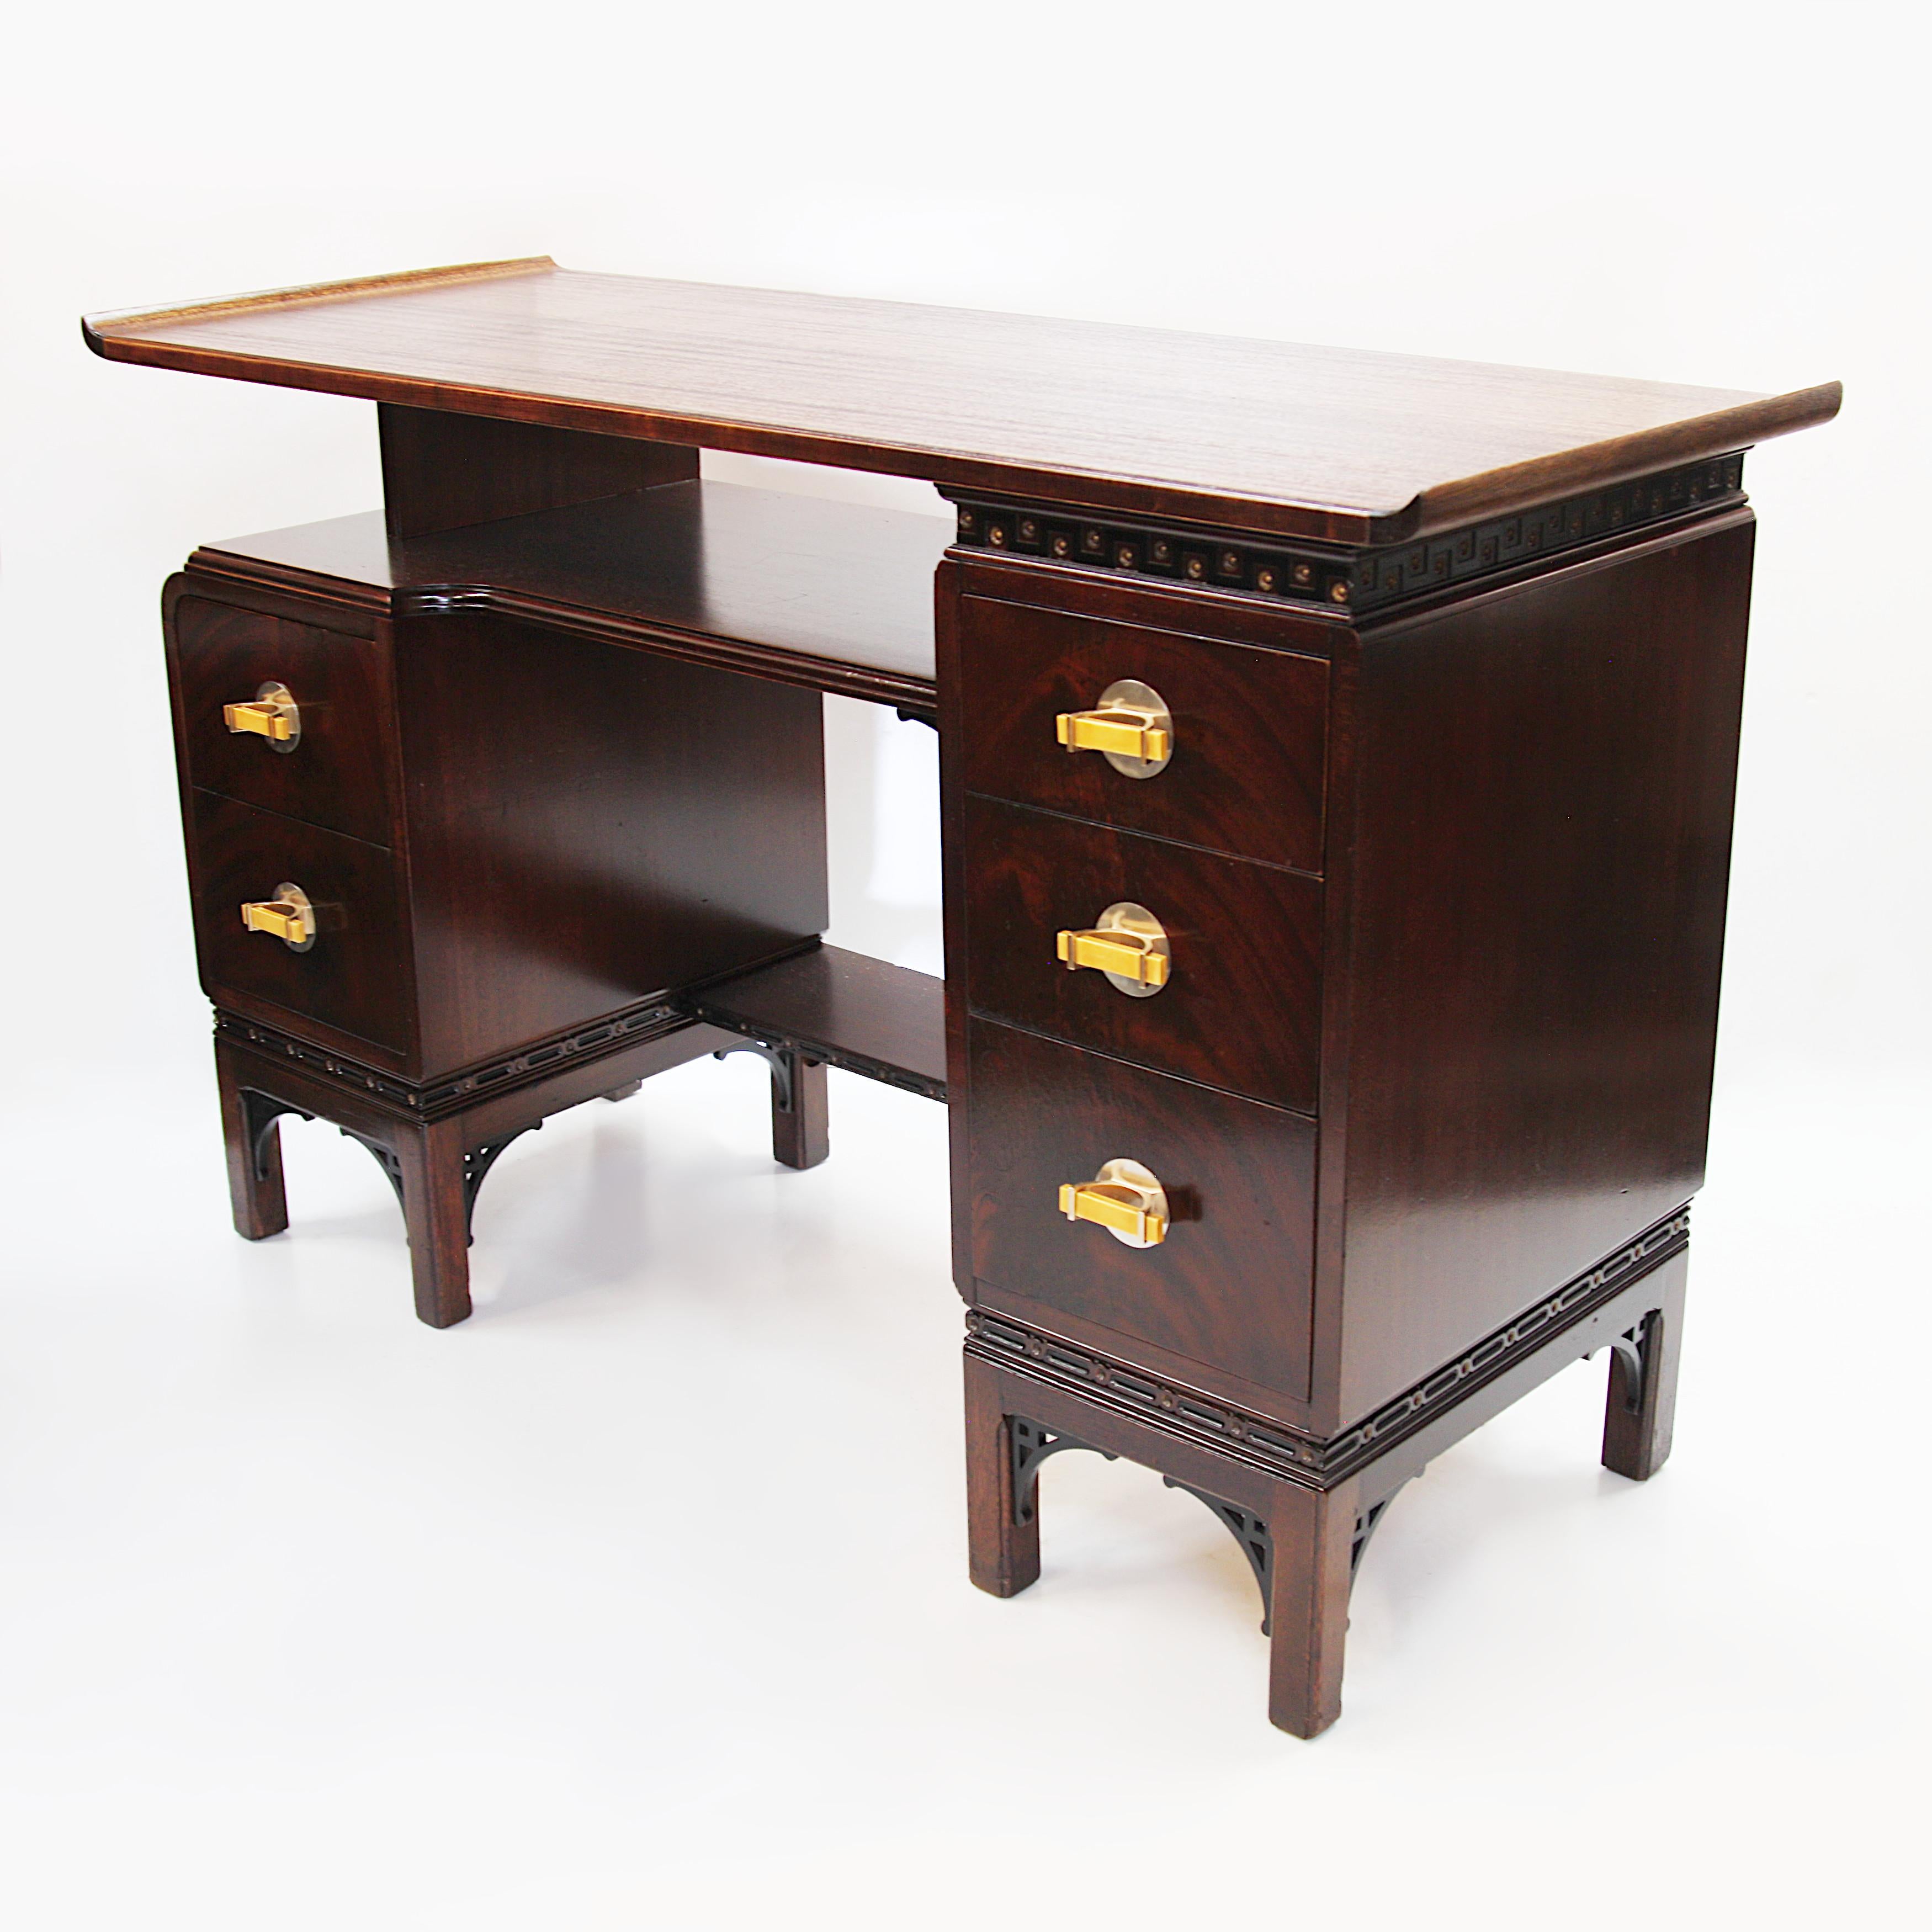 Rare pagoda writing desk by The Northern Furniture Company /Rway. Desk features a floating, pagoda-inspired top, unique Bakelite/silver drawer pulls, and a myriad of Asian influenced design features. With its versatile size and interesting design,